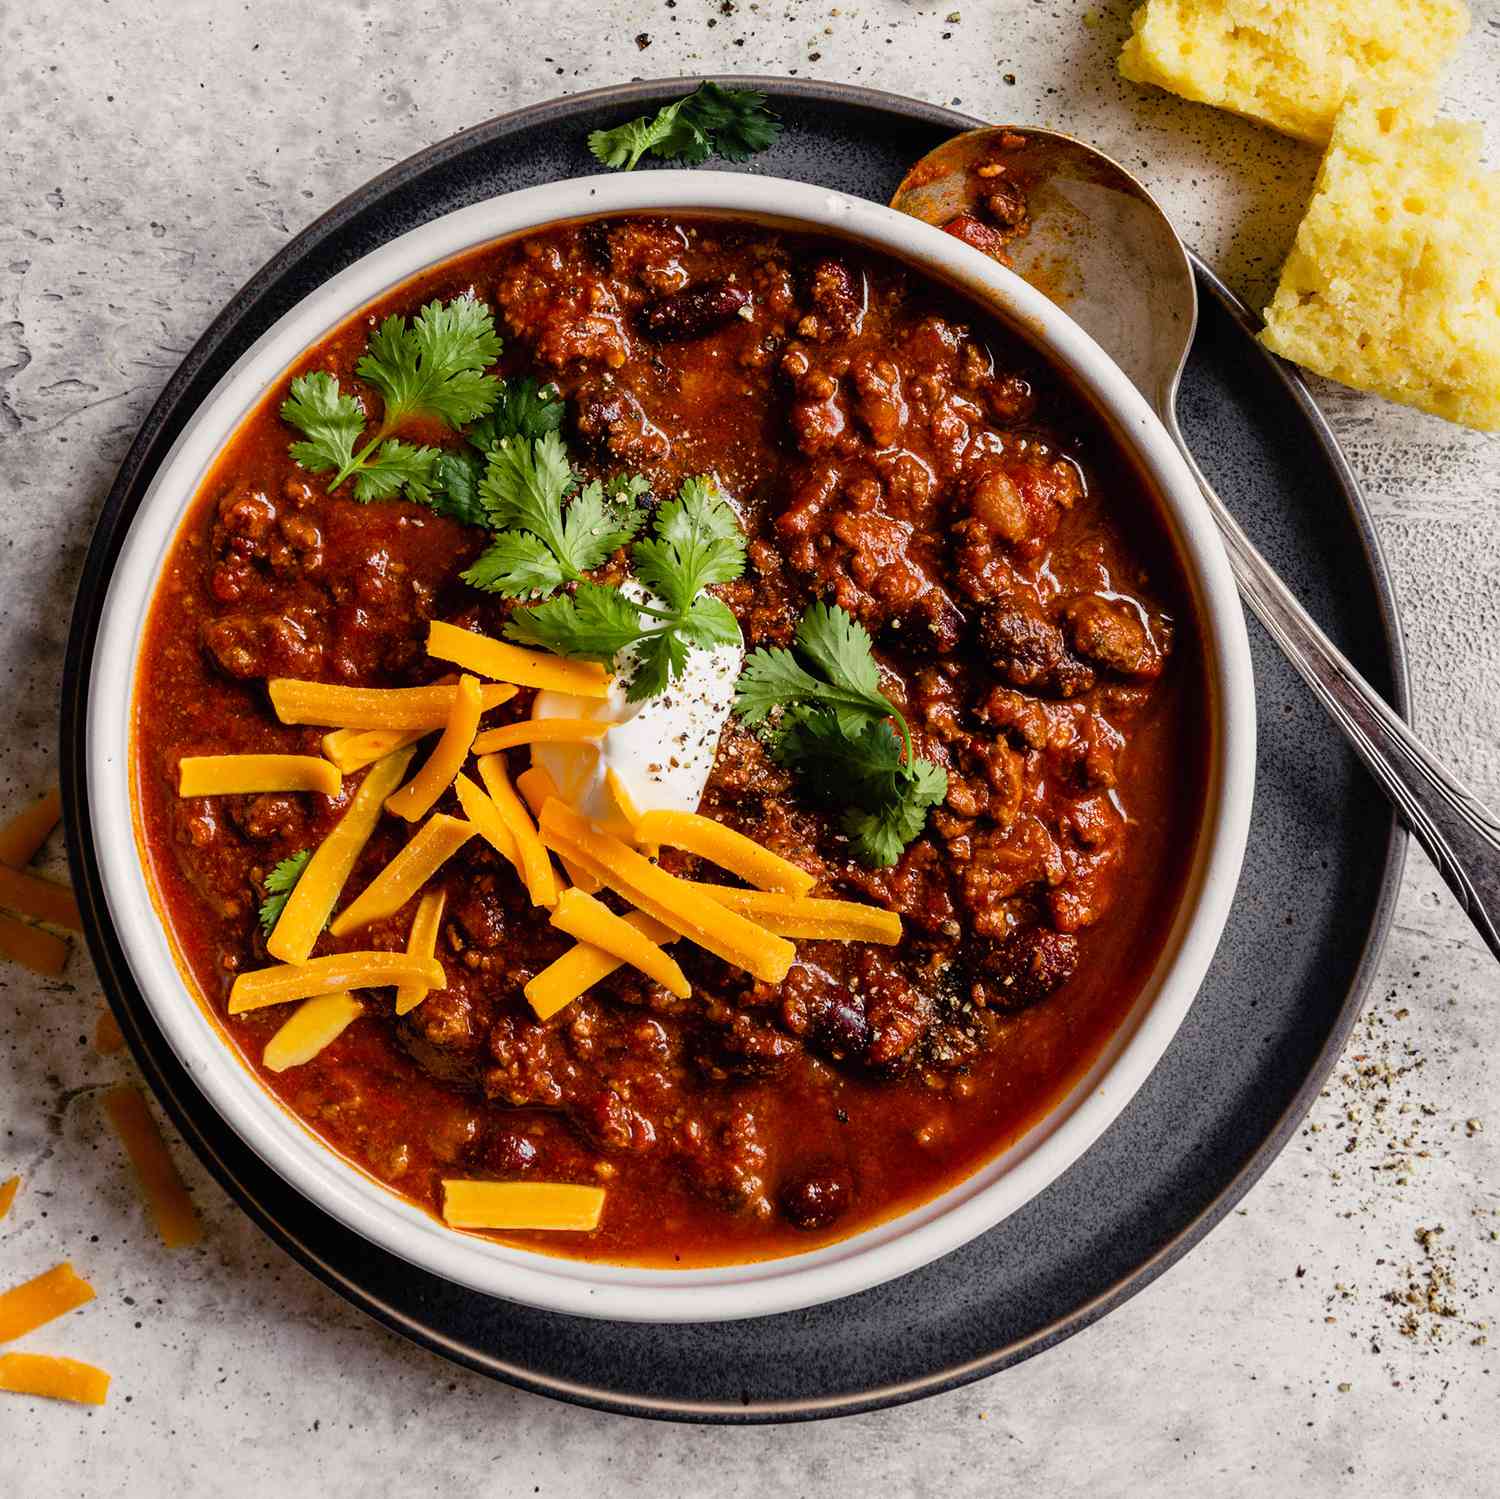 6 Secret Ingredients to Help You Make the Best Chili